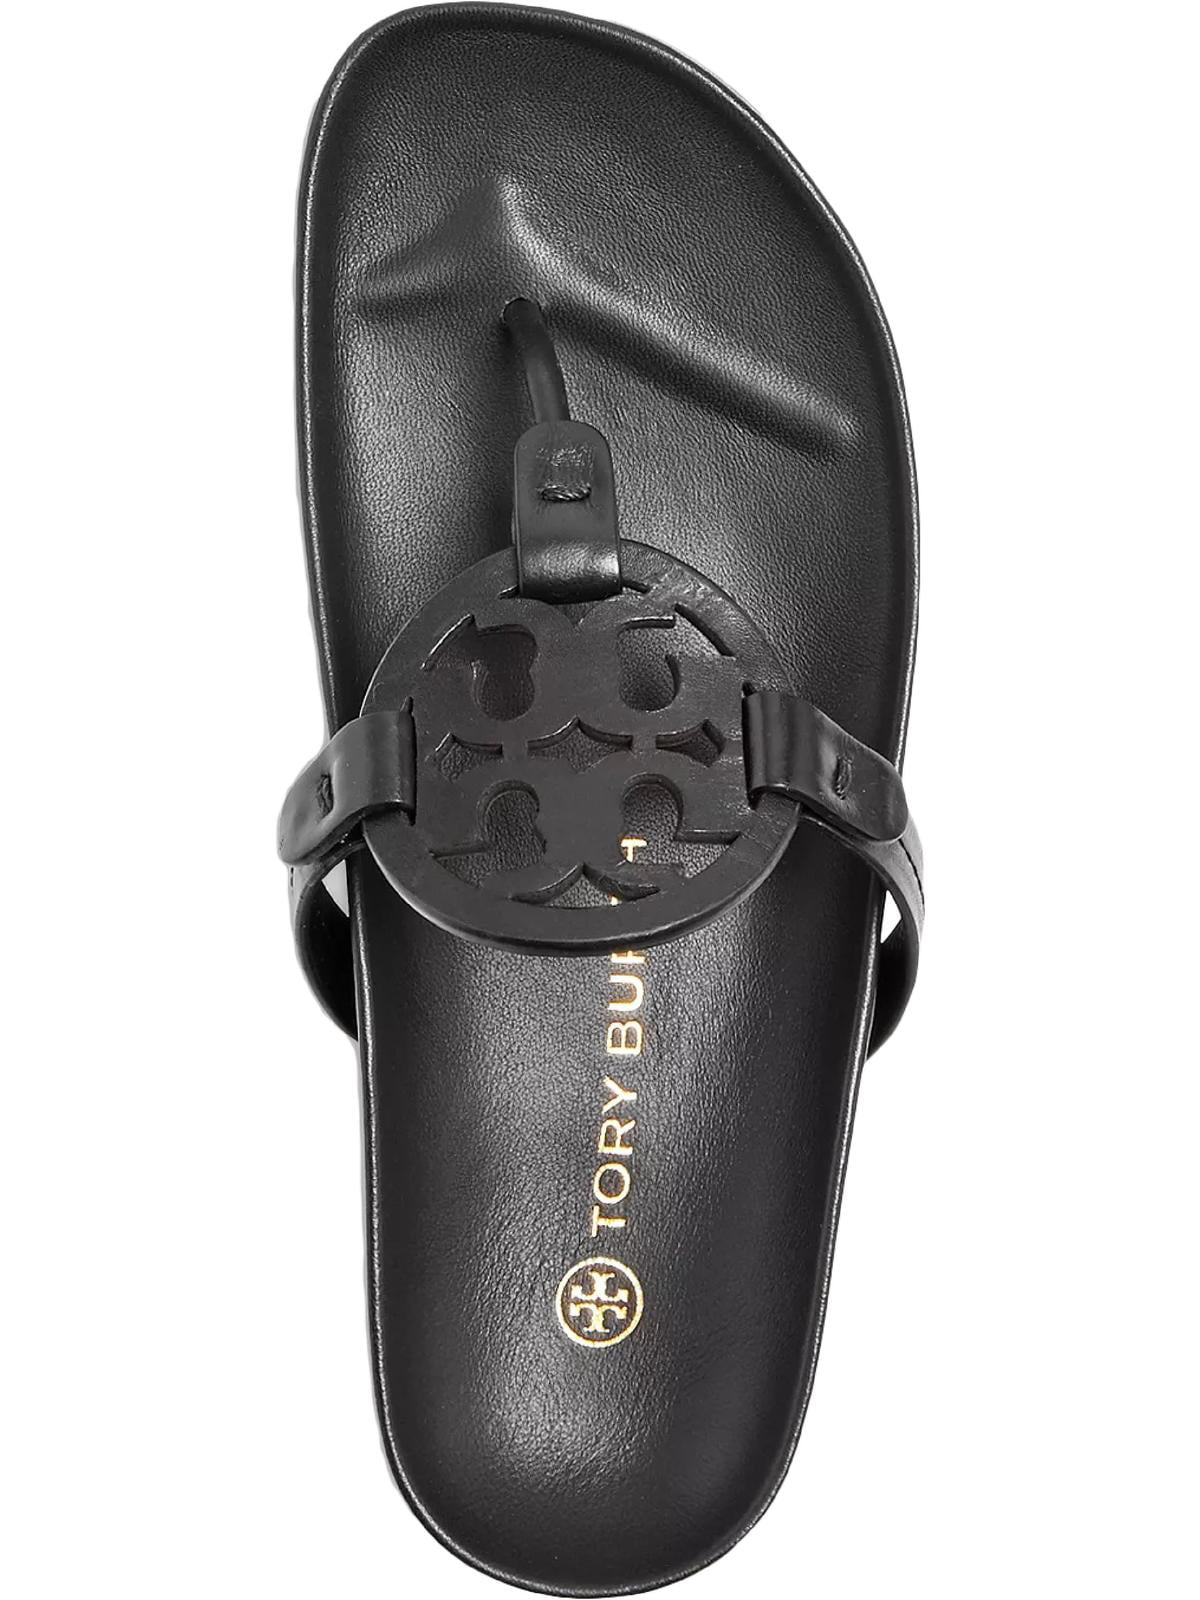 $50 Off Tory Burch Miller Sandals | January 2018 Promo - The Double Take  Girls